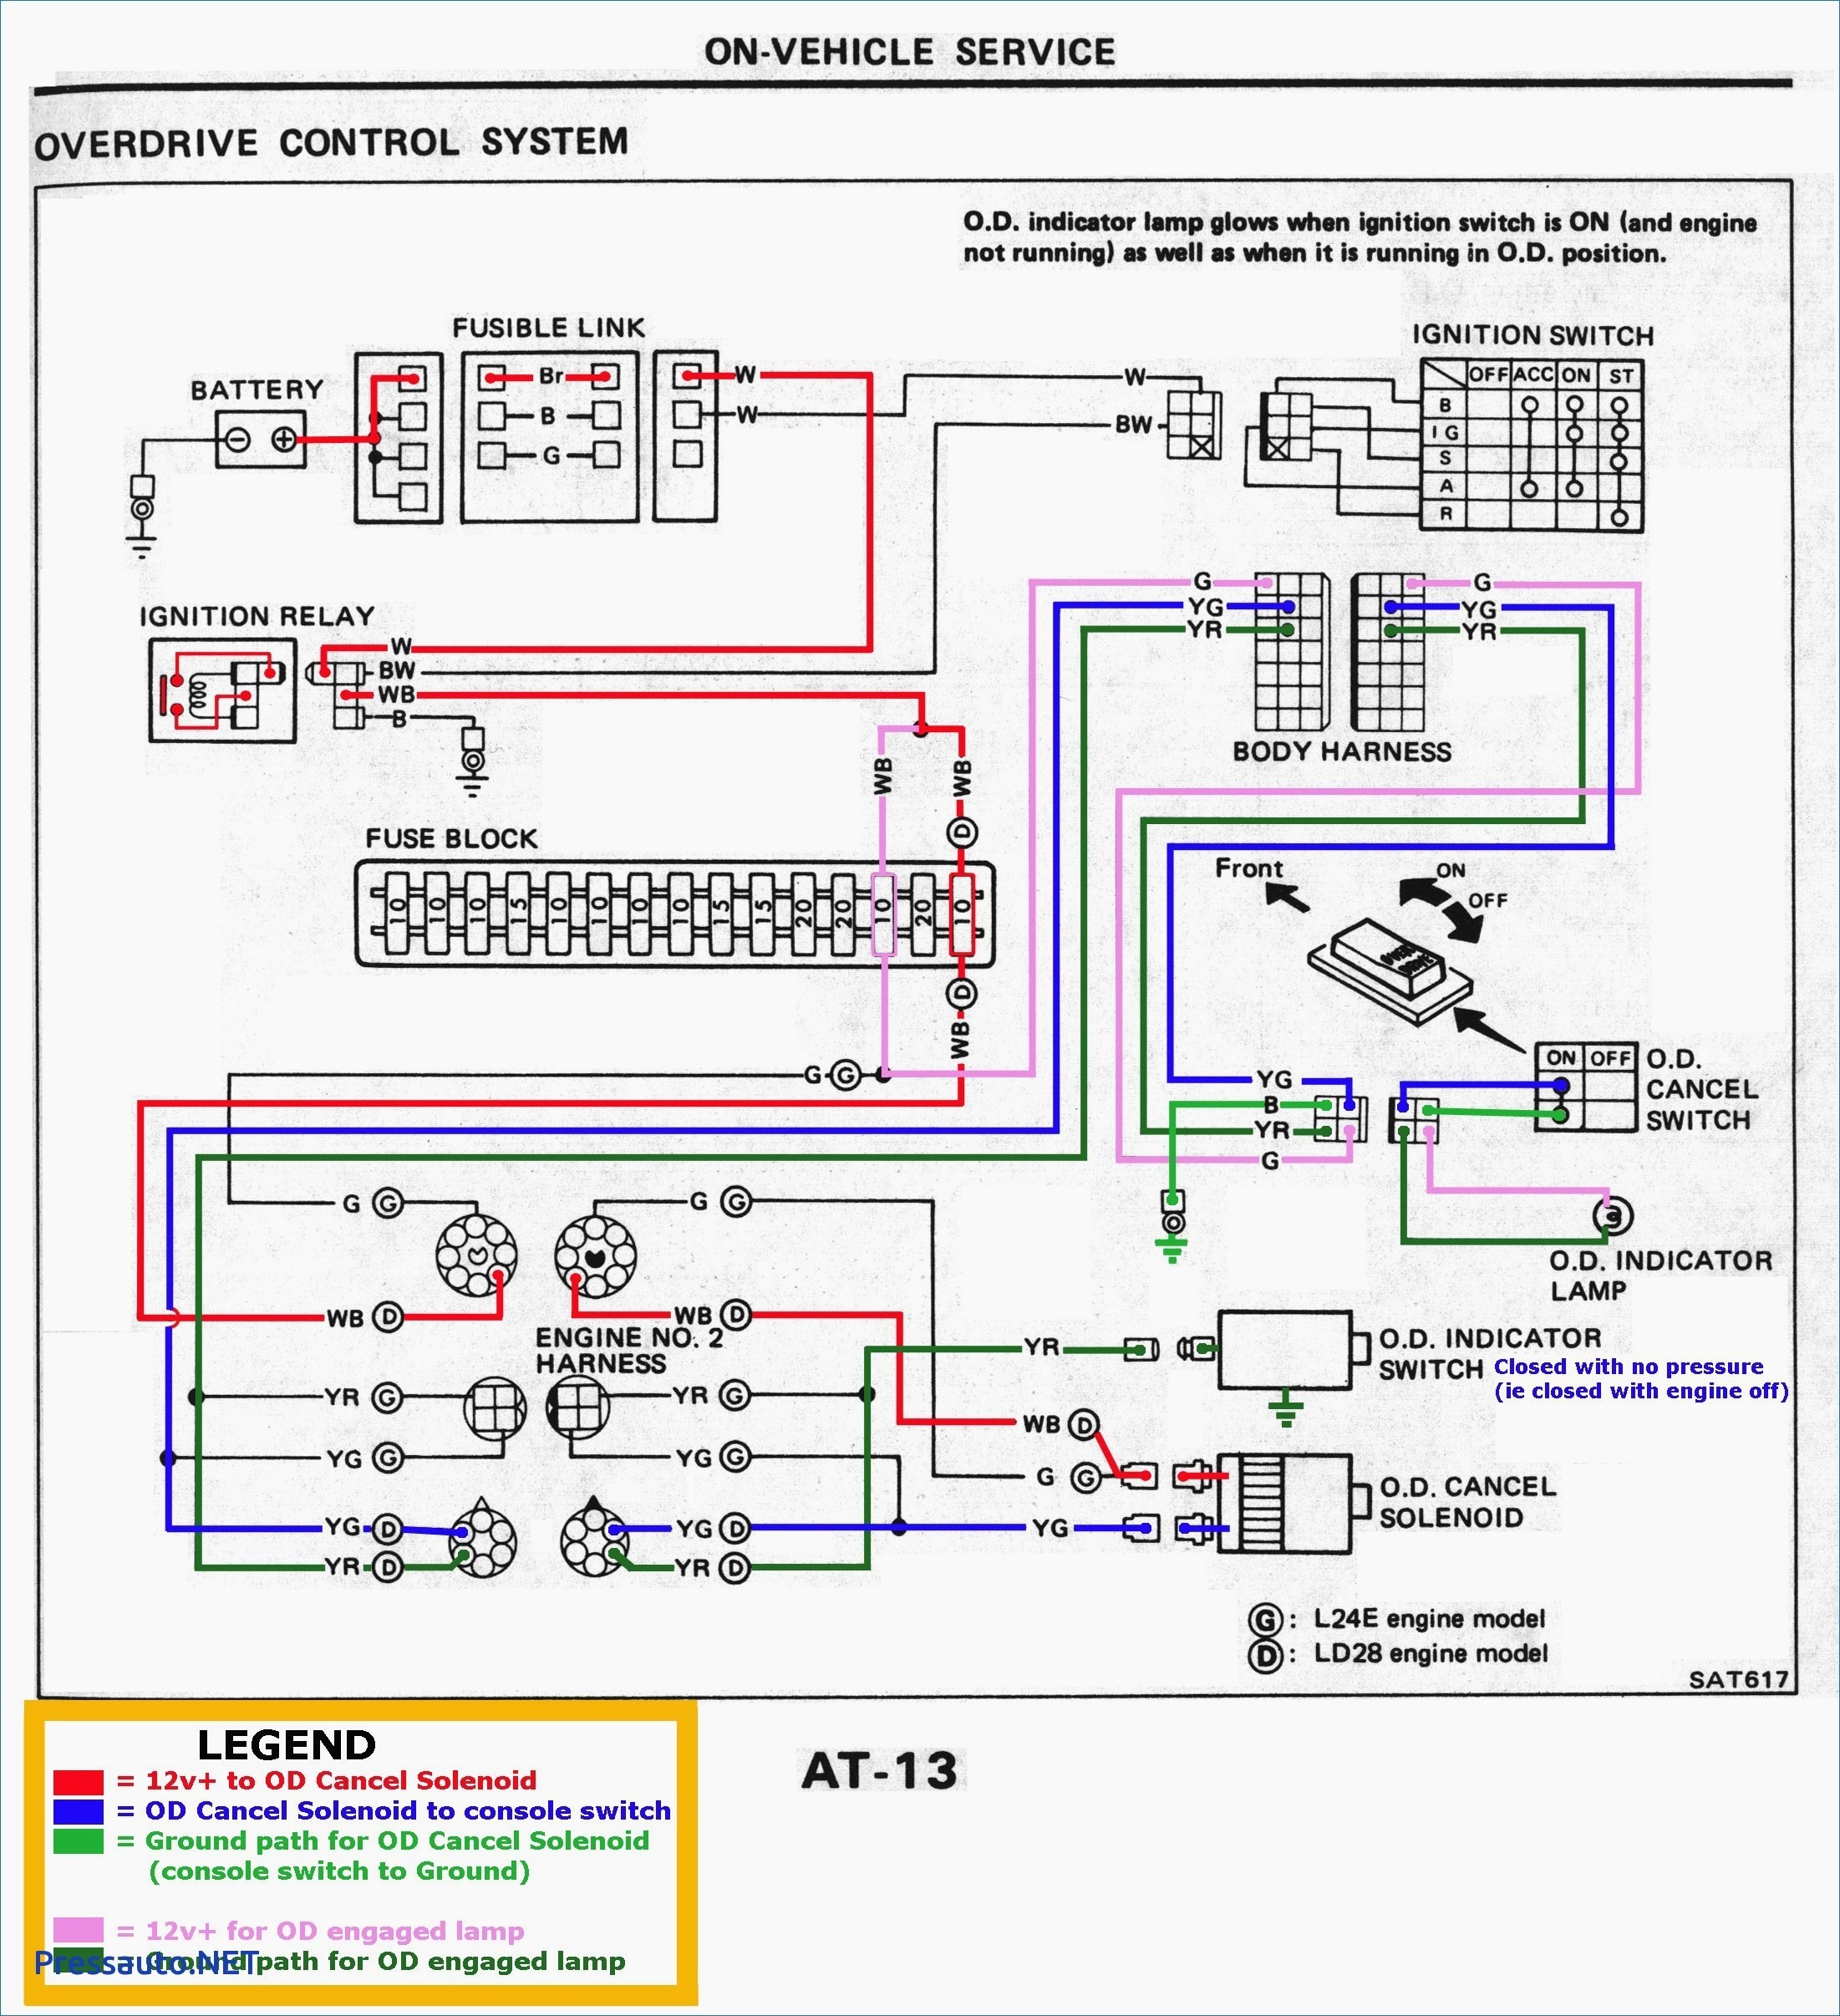 Ceiling Light Wiring Diagram New Magnificent Wiring Diagrams Mazda B2600 Electrical